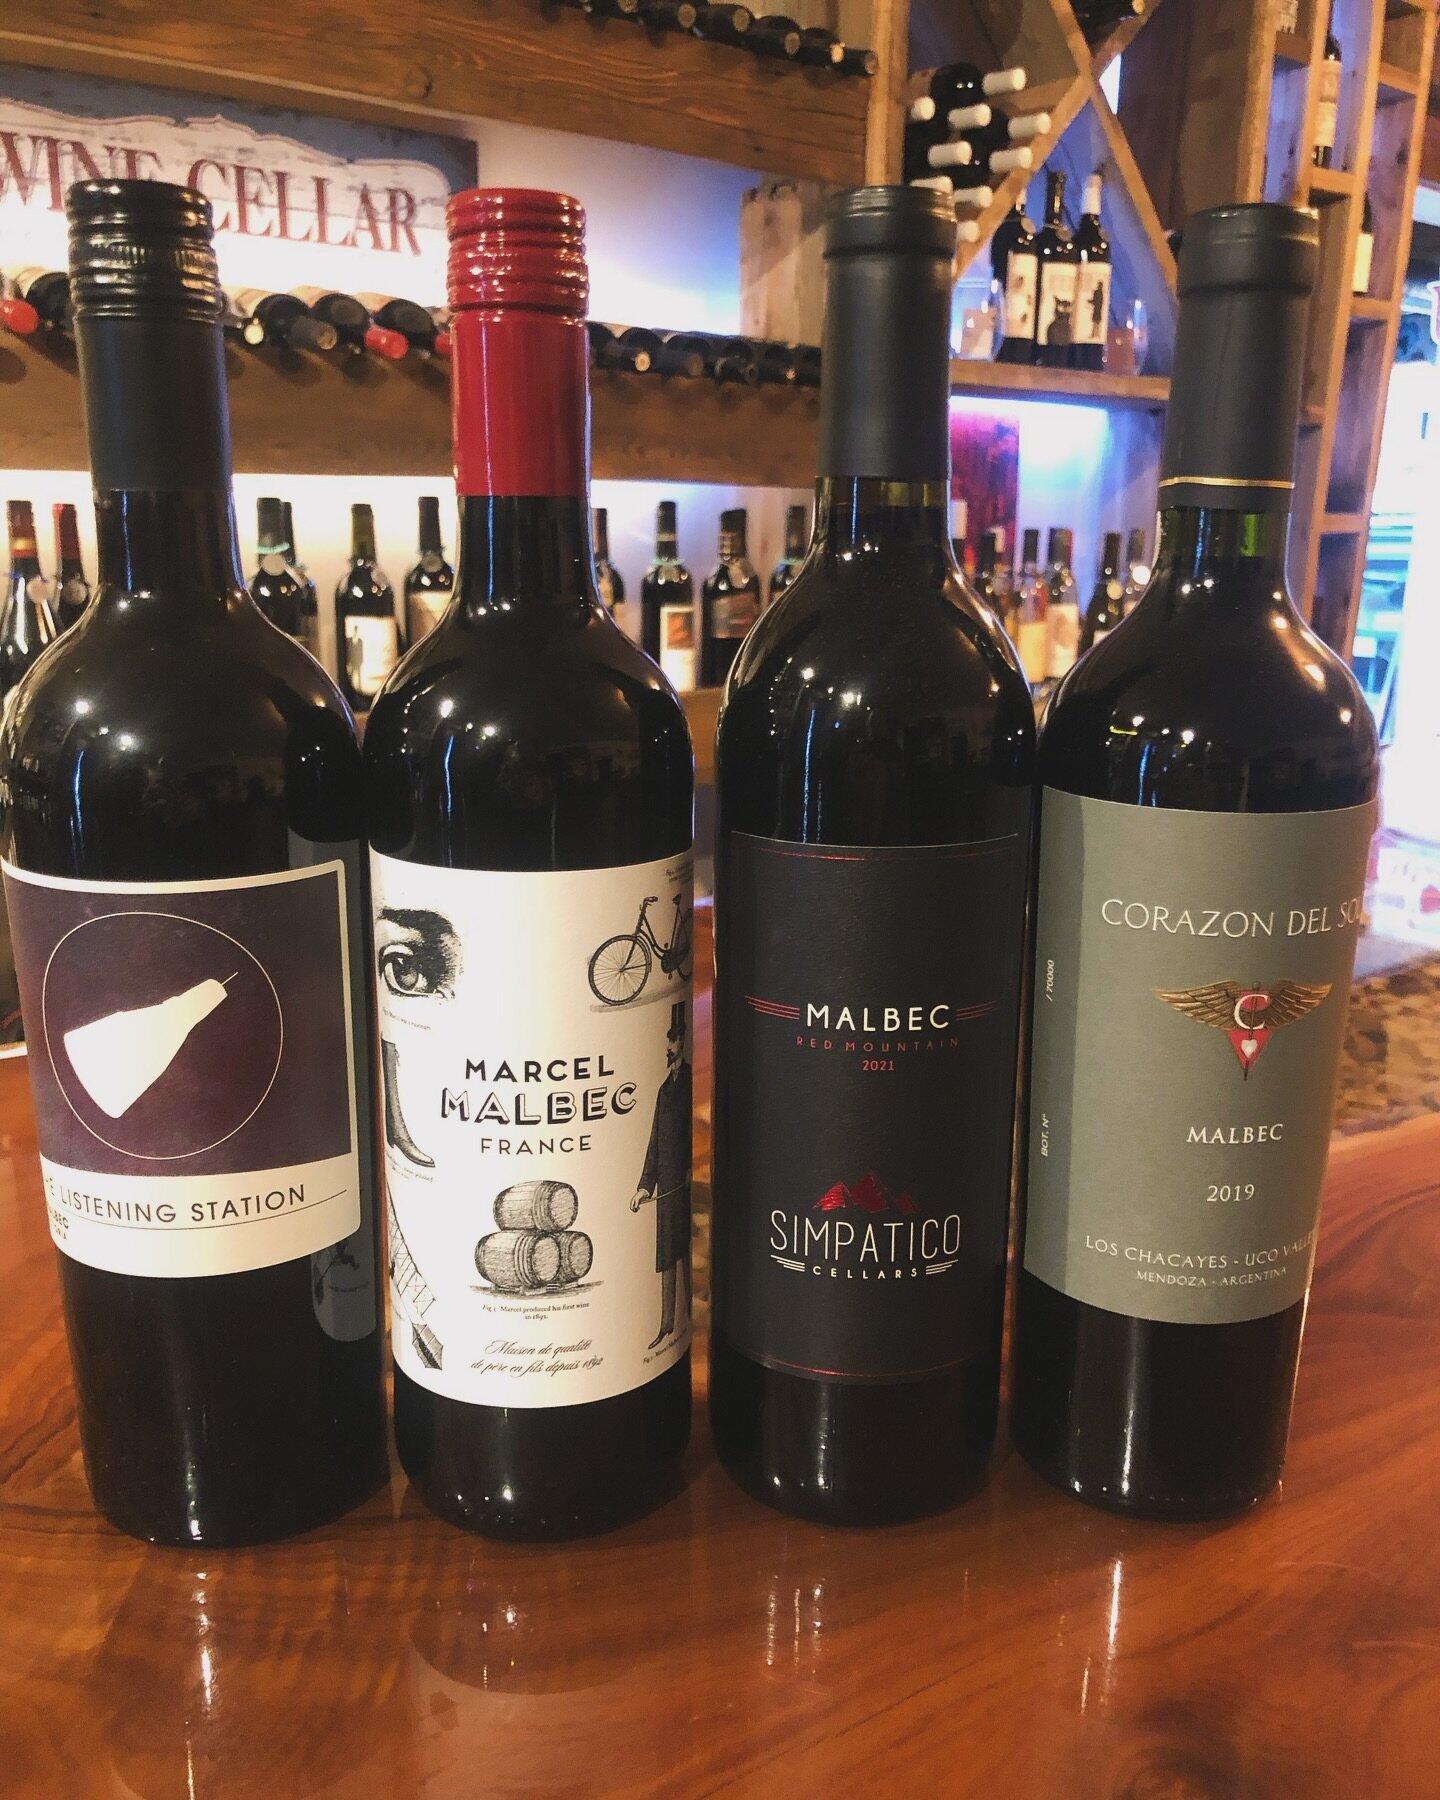 It&rsquo;s Malbec night this week at #winewednesday🍷 Featuring wines from Australia, France, Washington, and Argentina!🌎 Come hang with us in the wine room this Wednesday from 4-7 and get to taste some delicious wines from all over the world! We wi